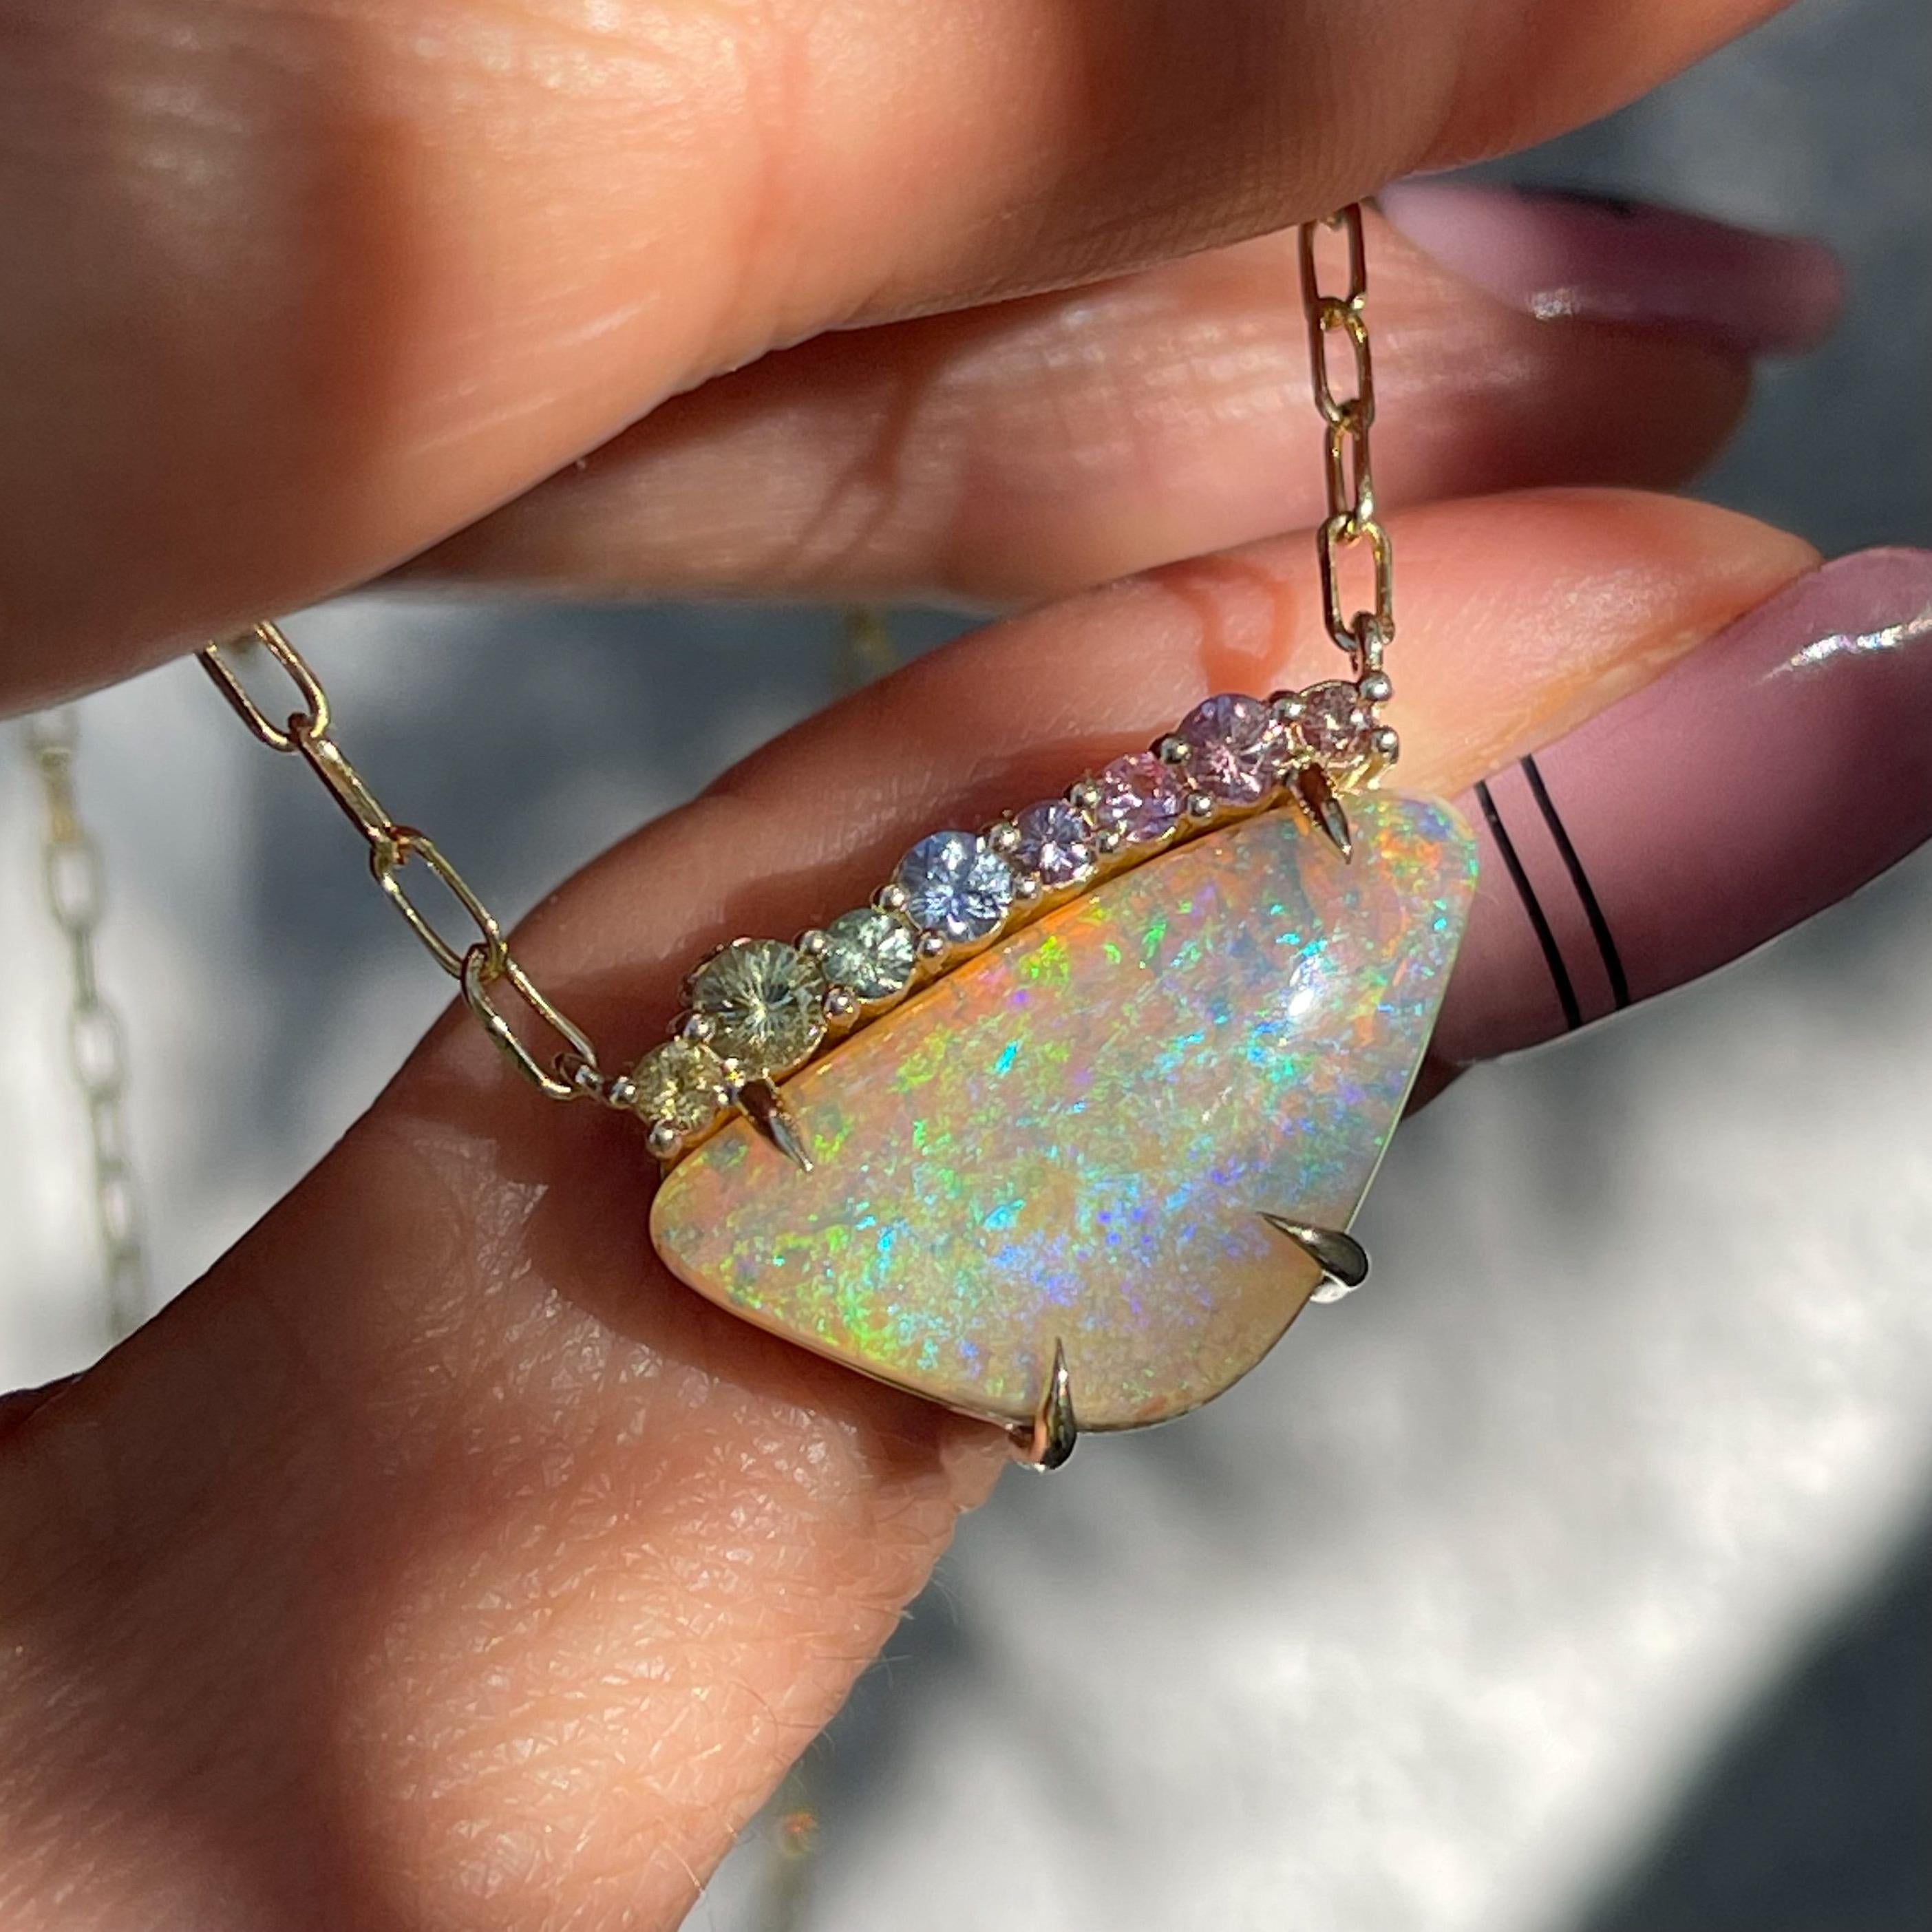 Swollen with color and ready to burst, this Australian Opal Necklace flexes its complexion. The 10 carat Pipe Opal and row of ombré sapphires coalesce in a rainbow palette, poised to reveal their splendor. At the base of the stone 3D masses form,